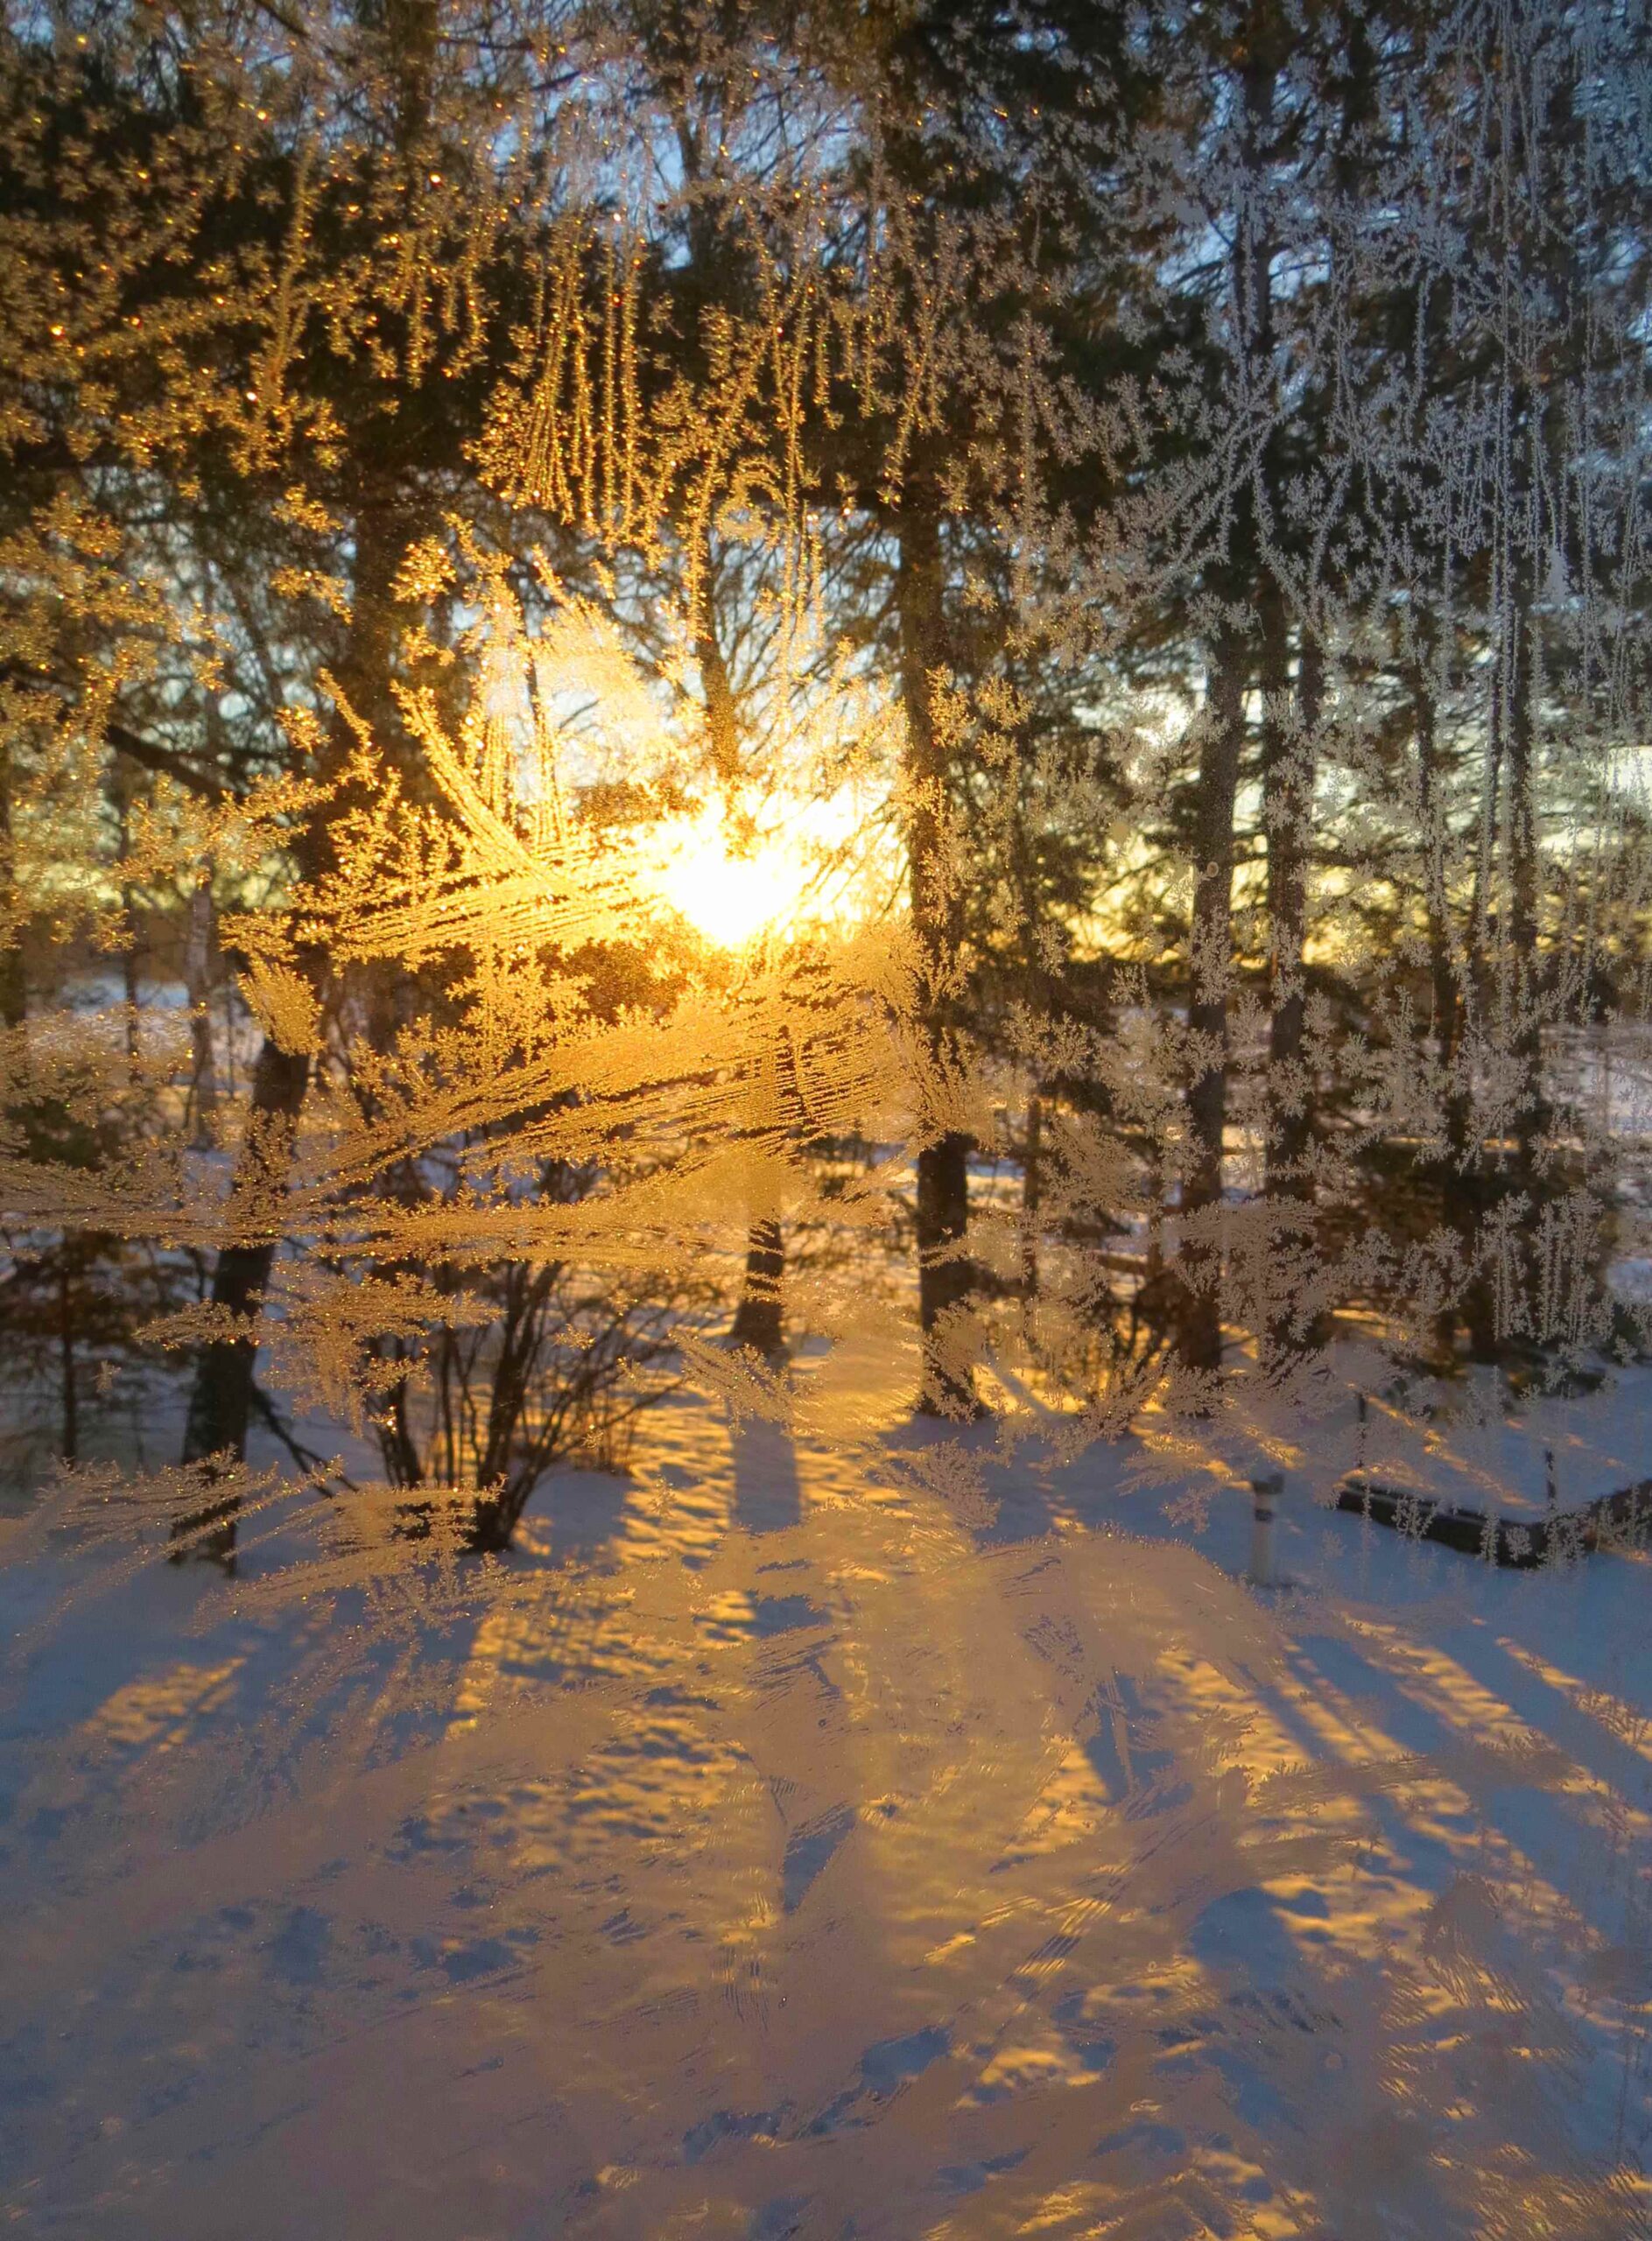 Winter -- Sunrise through a Frosted Window